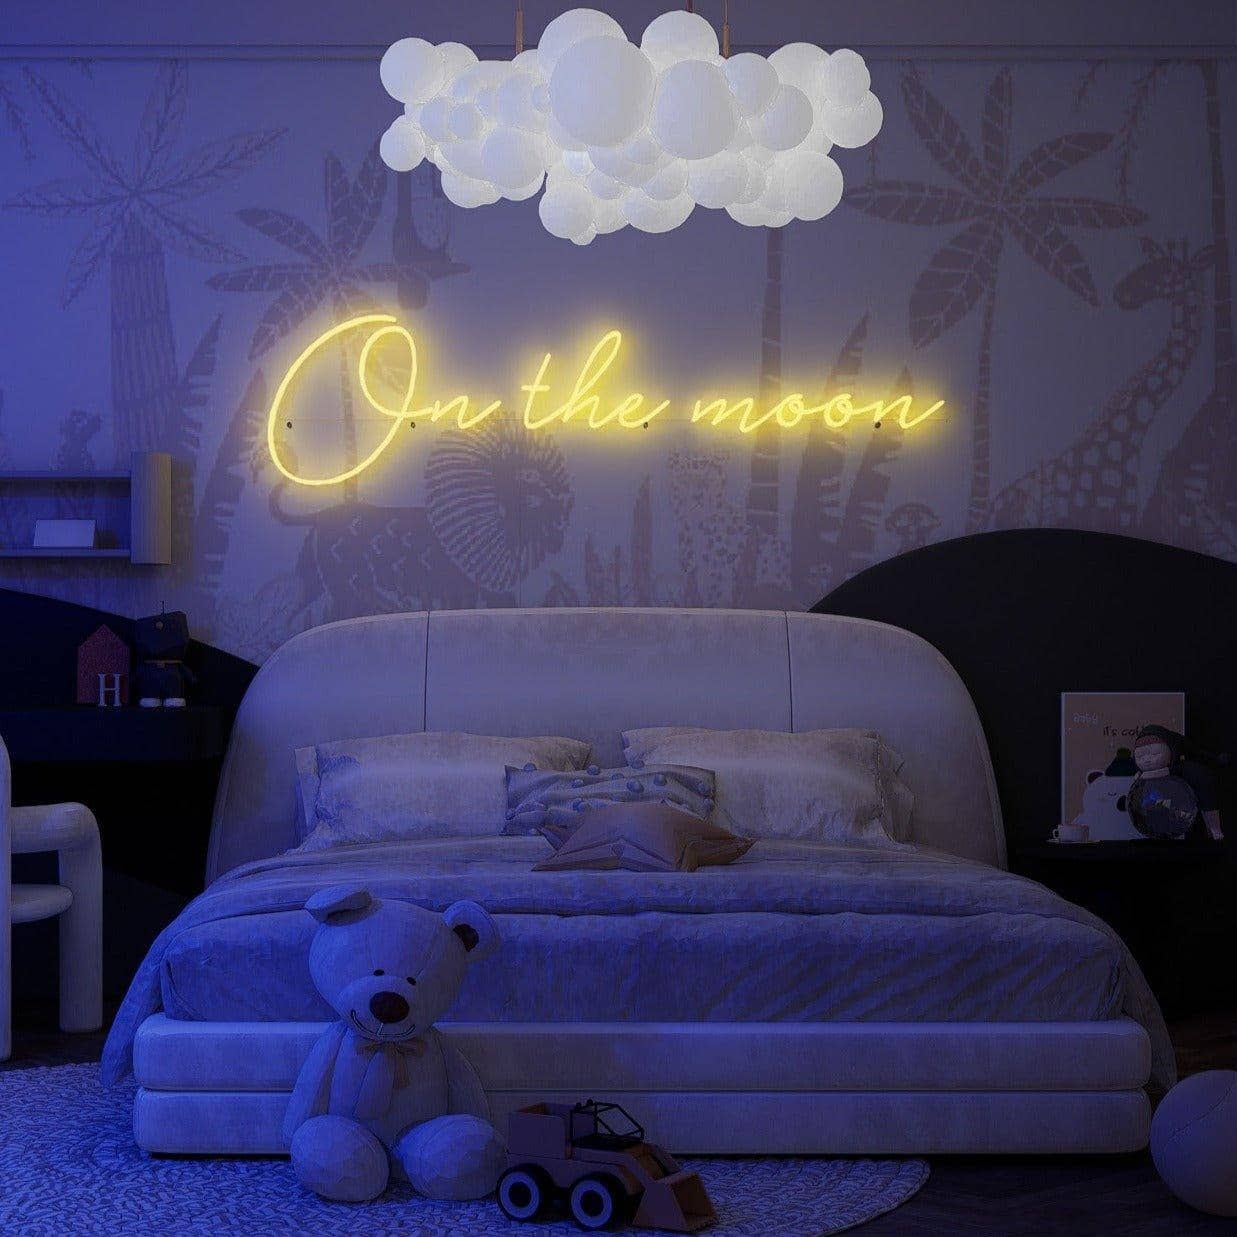 night-shot-of-lit-yellow-neon-lights-hanging-on-display-in-bedroom-on-the-moon